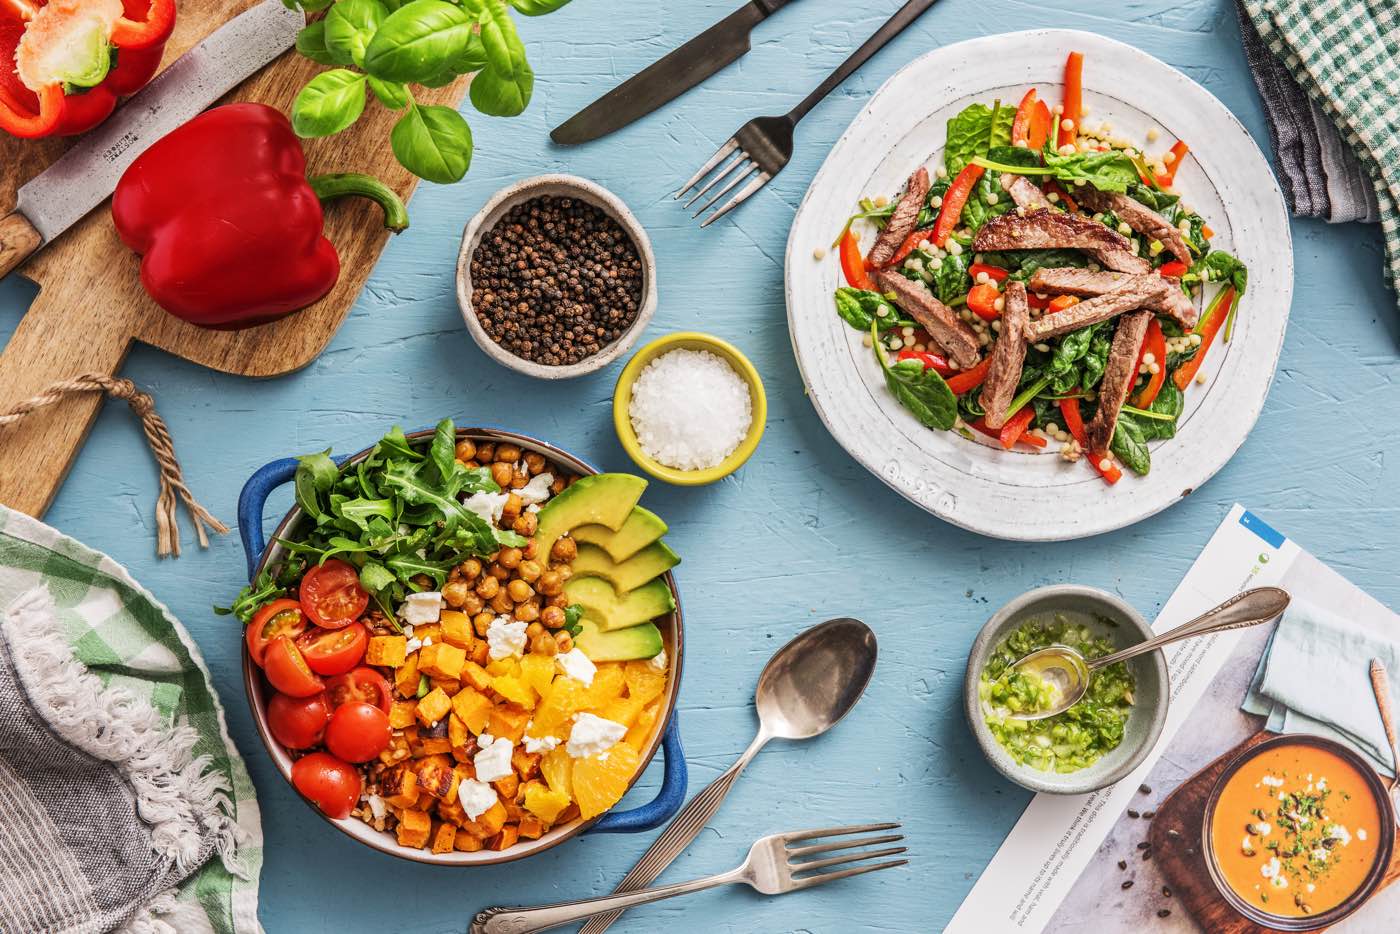 <h2>Dinner time made easy with HelloFresh</h2>